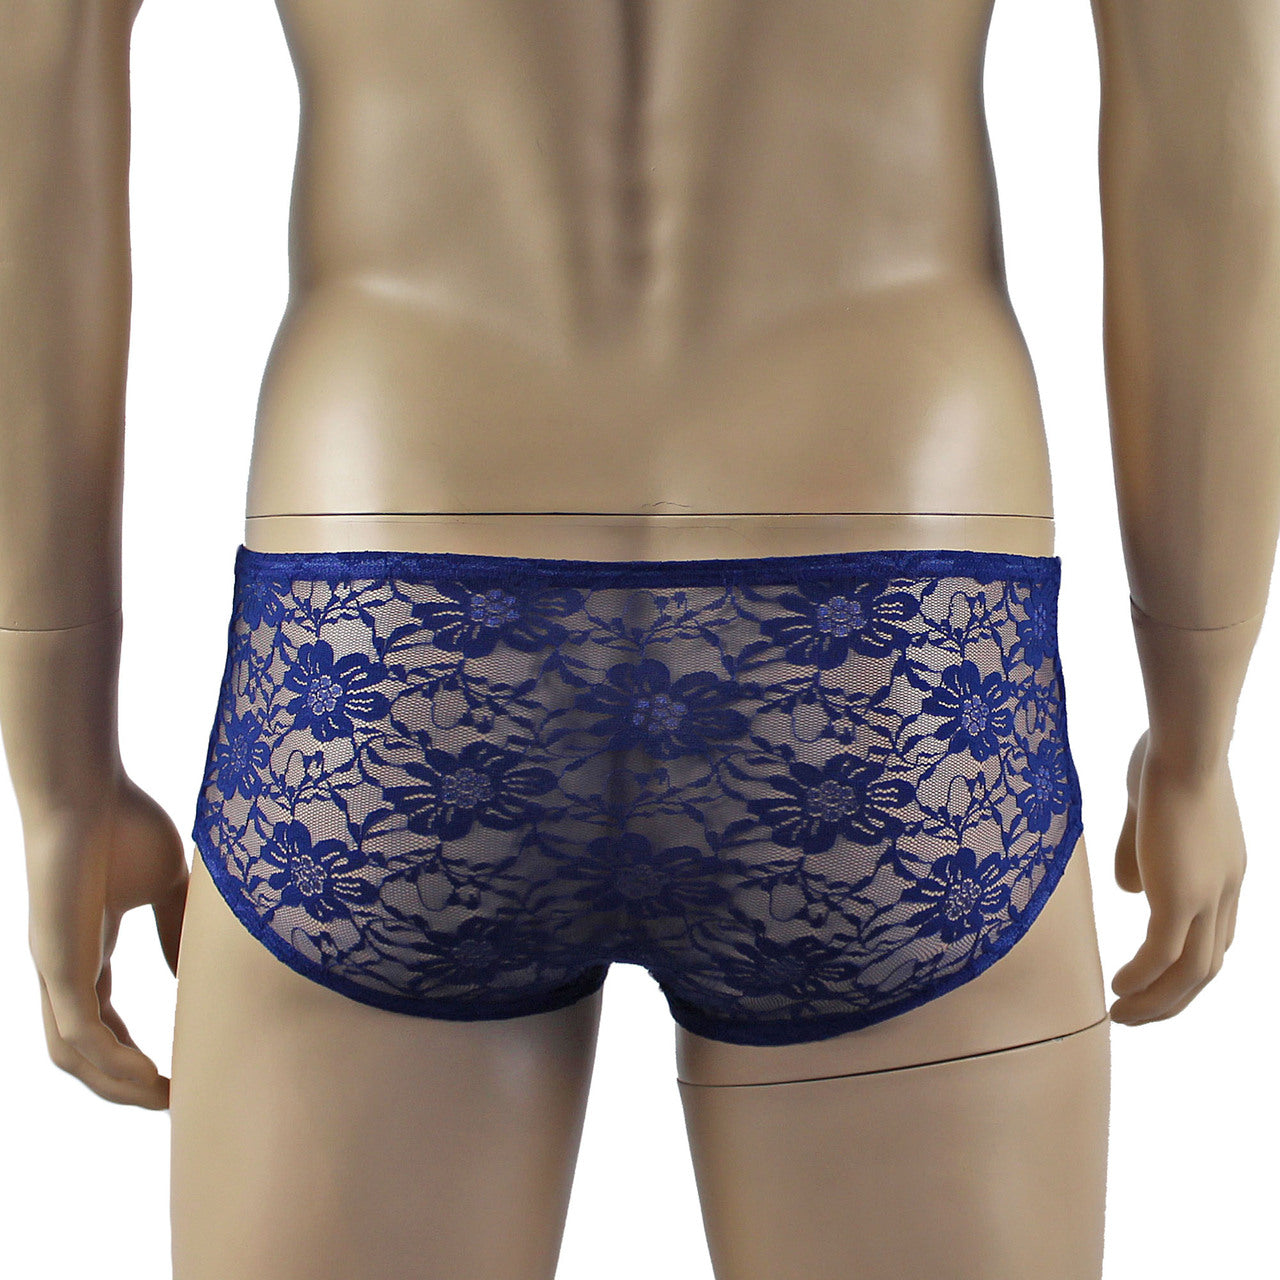 LAST ORDERS - Mens Sexy Lingerie Stretch Lace  Male Panty Bikini Brief Navy